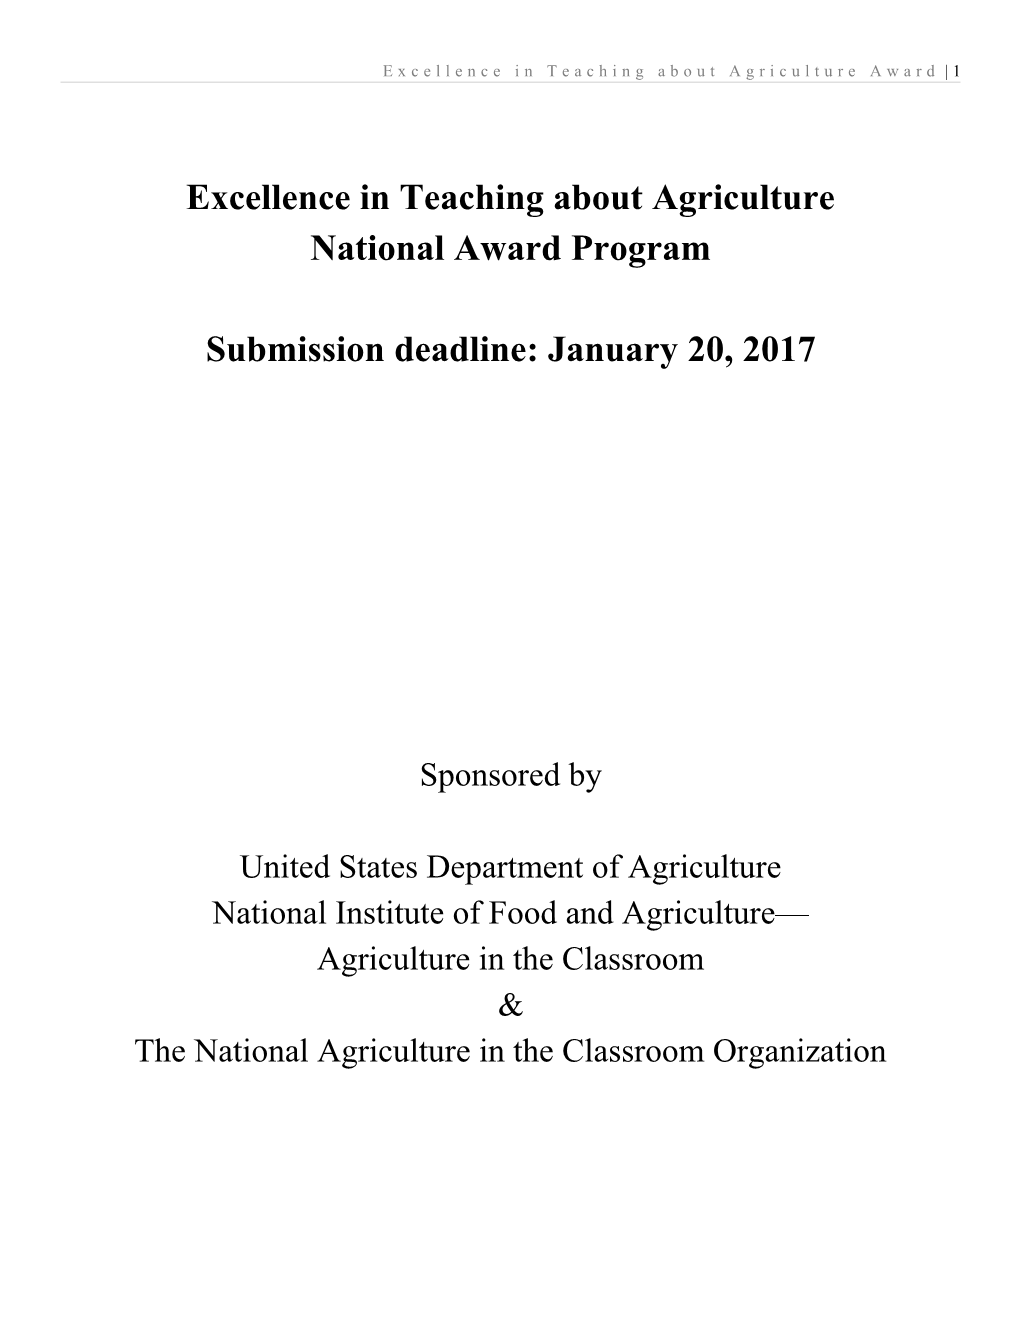 Excellence in Teaching About Agriculture